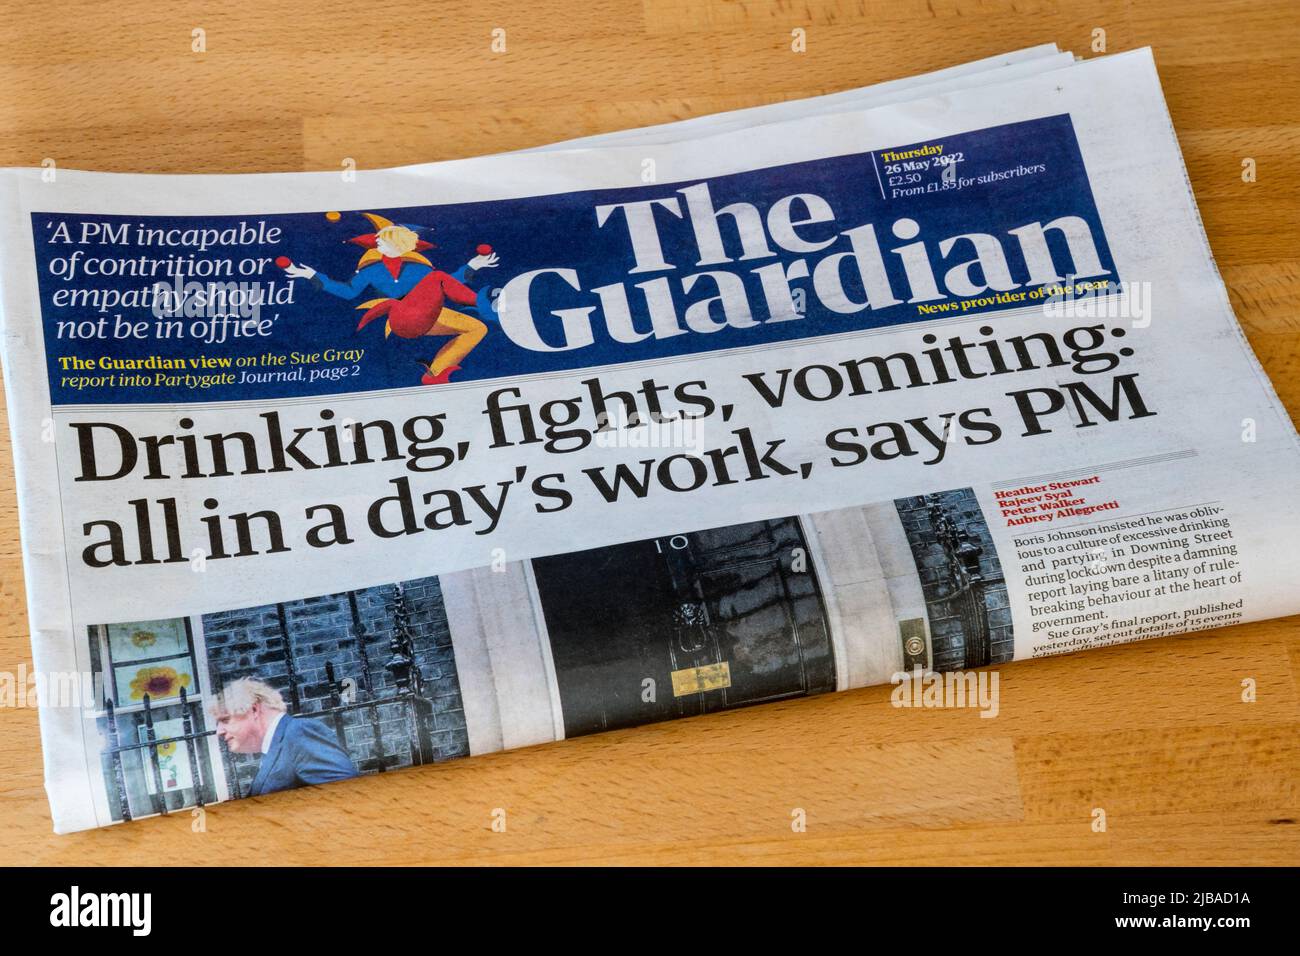 26 May 2022 Guardian headline reads Drinking, fights, vomiting: all in a day's work, says PM. Stock Photo